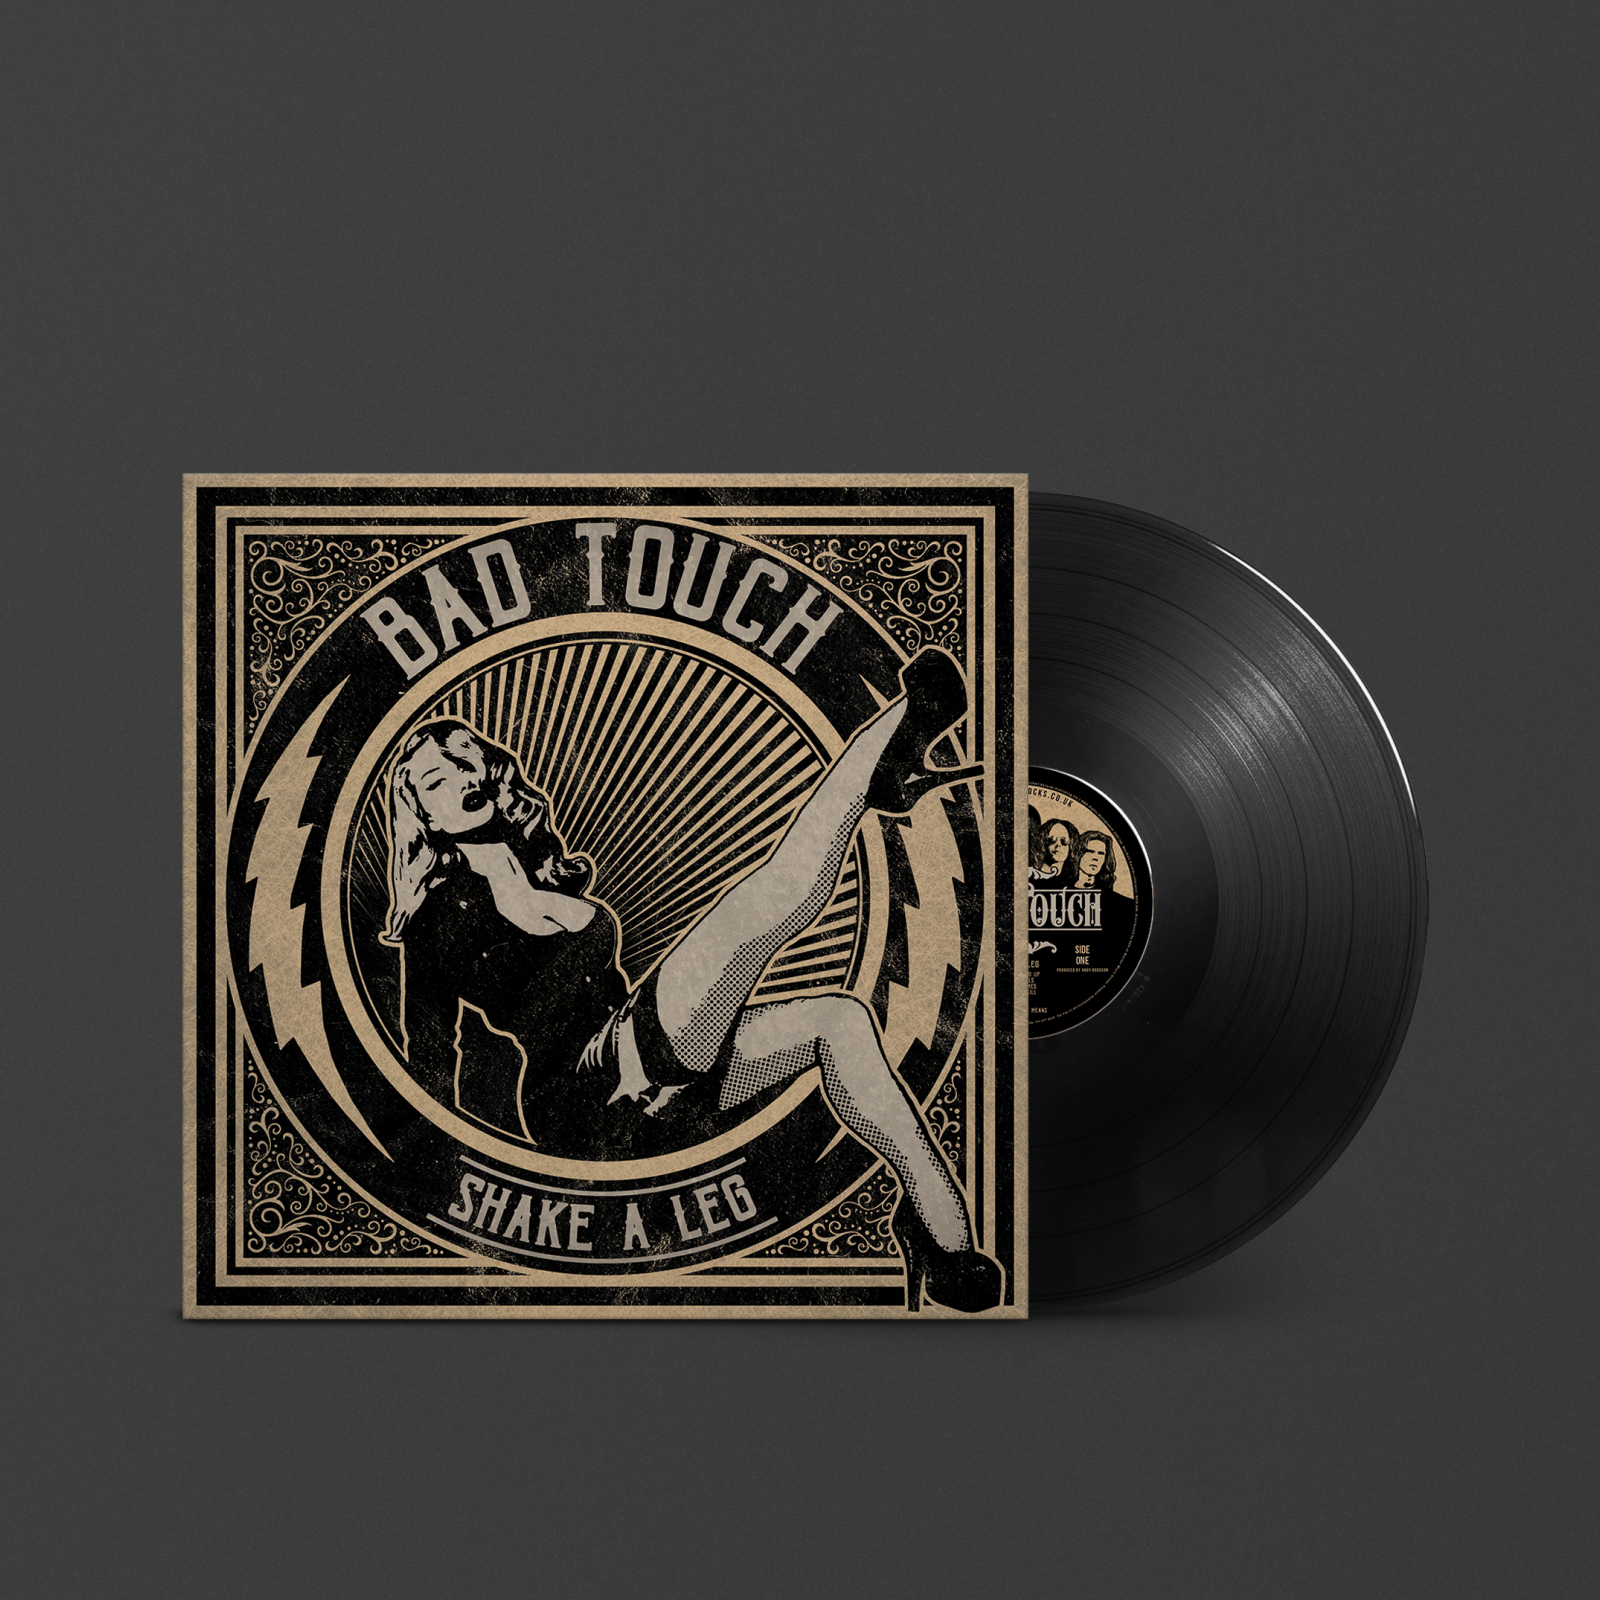 Vynil of Shake a Leg by Bad Touch